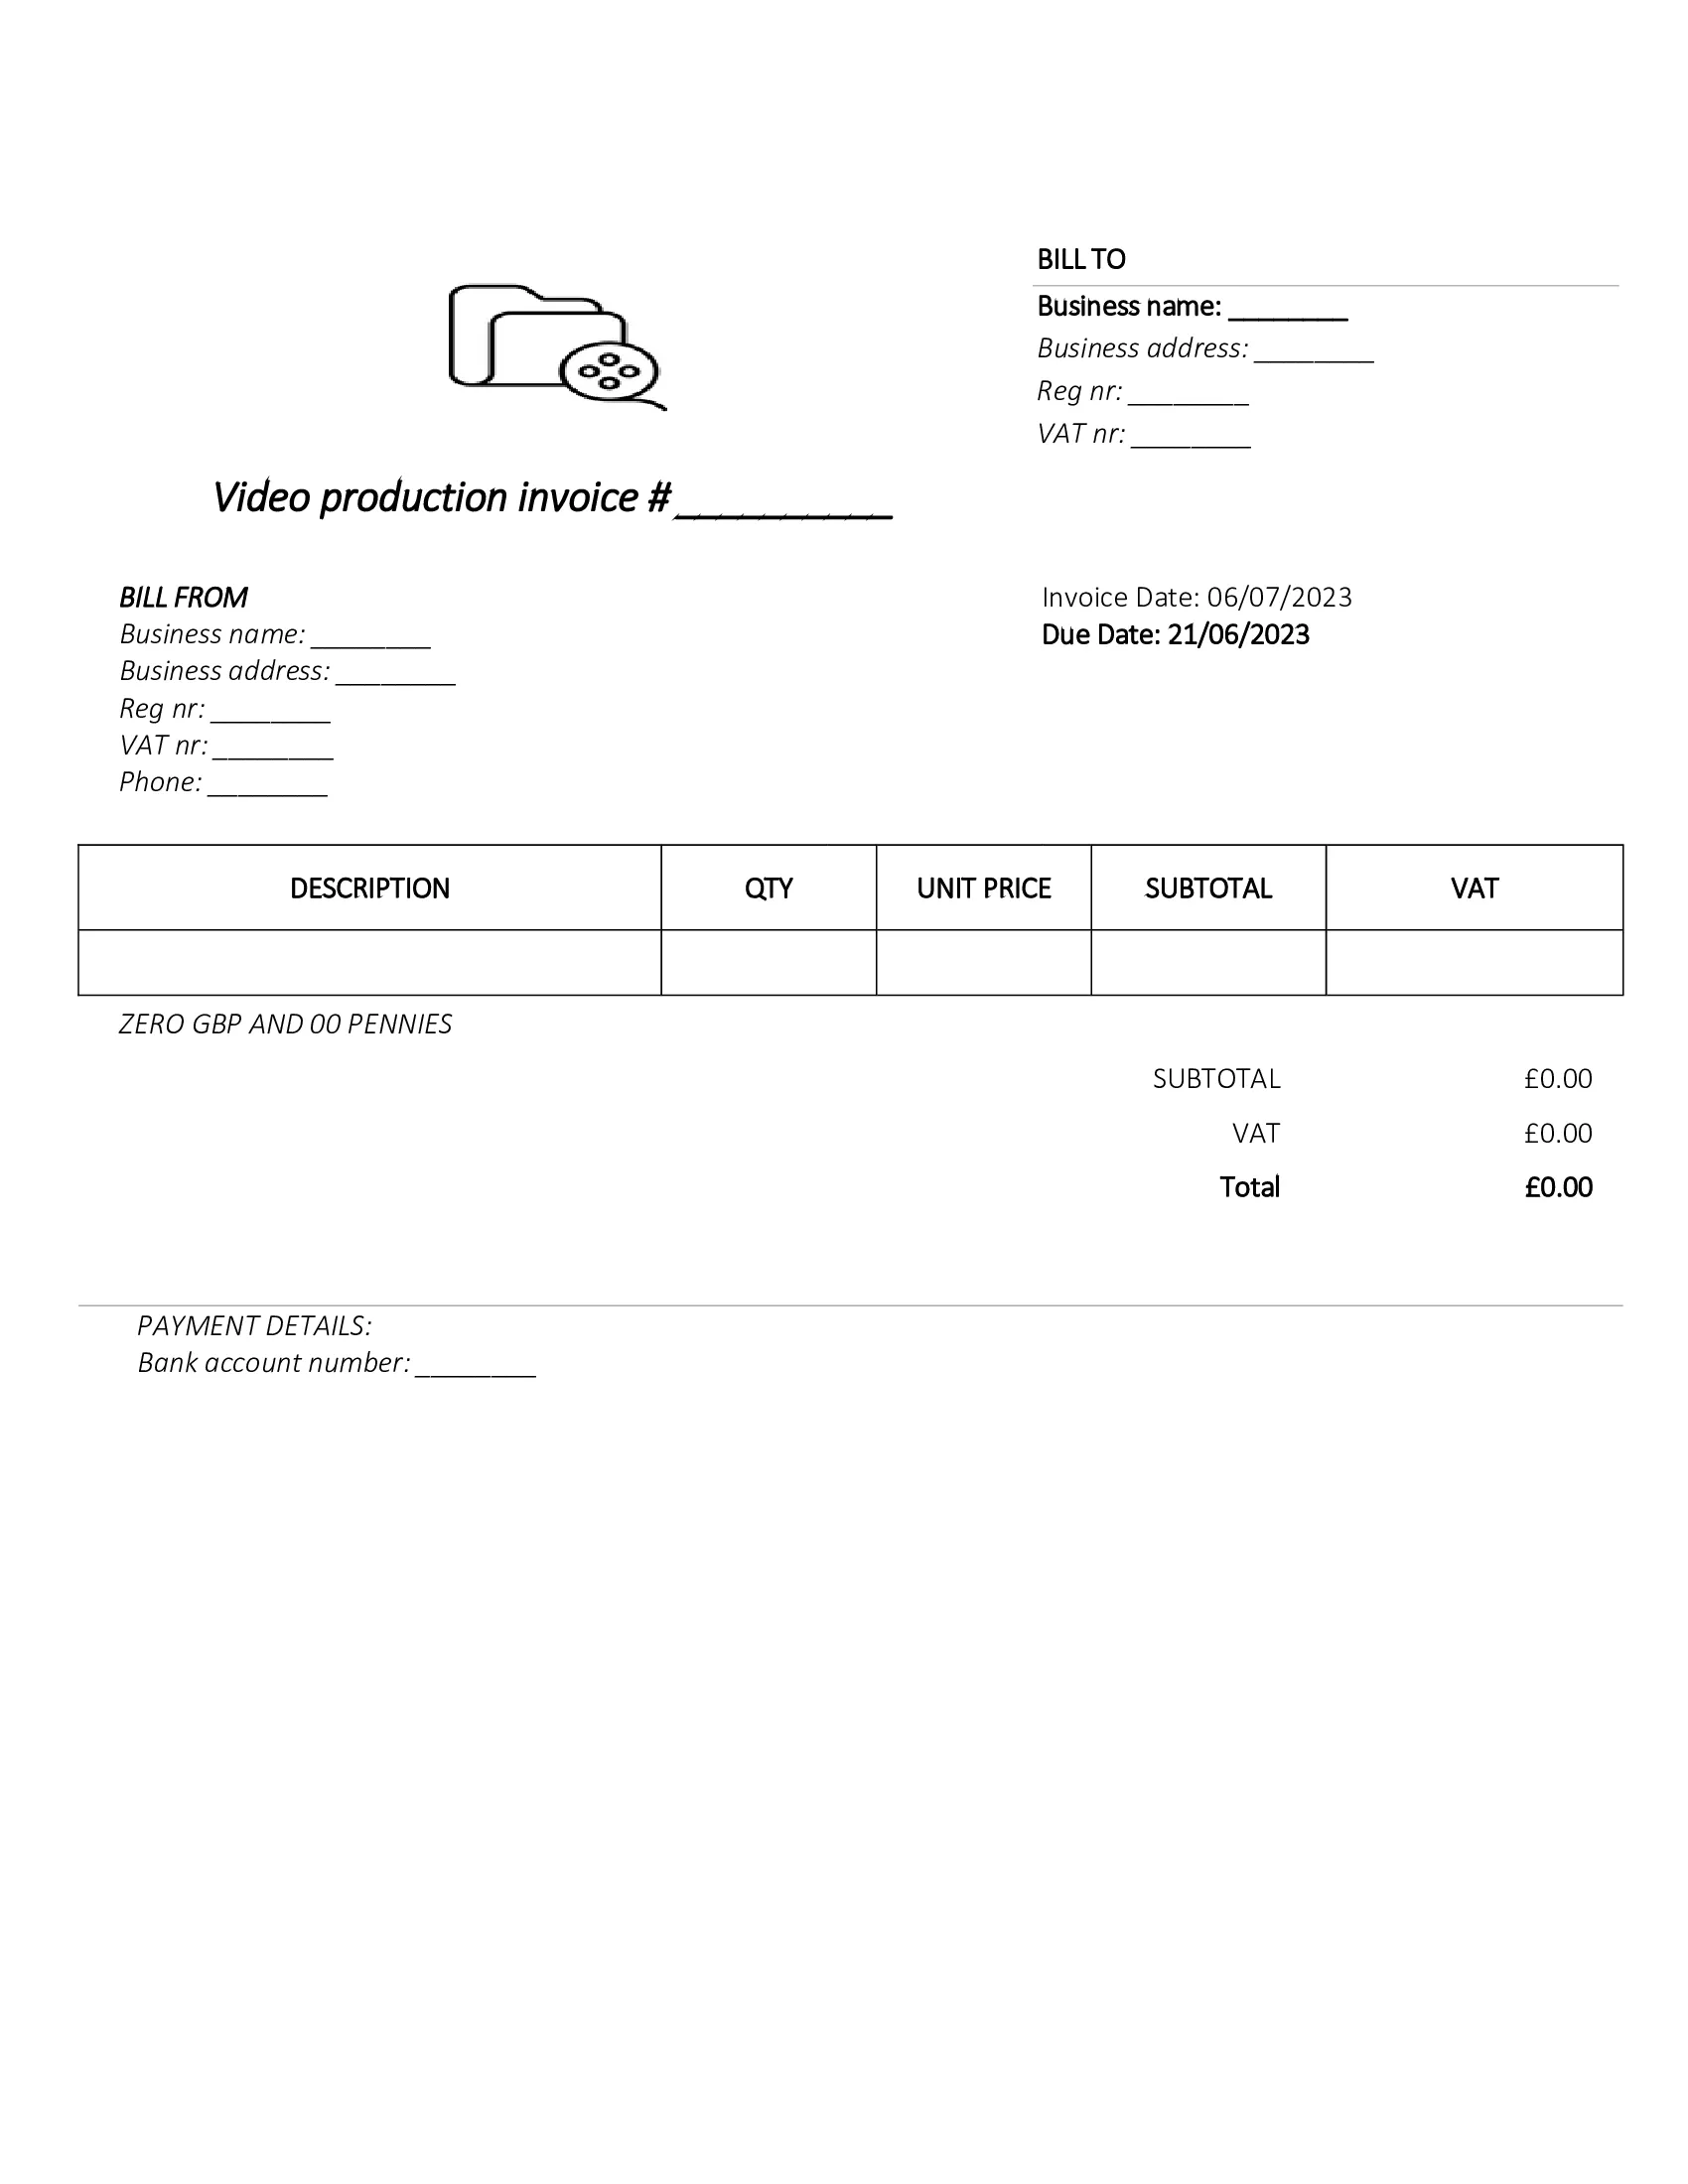 downloadable video production invoice template UK Word / Google docs